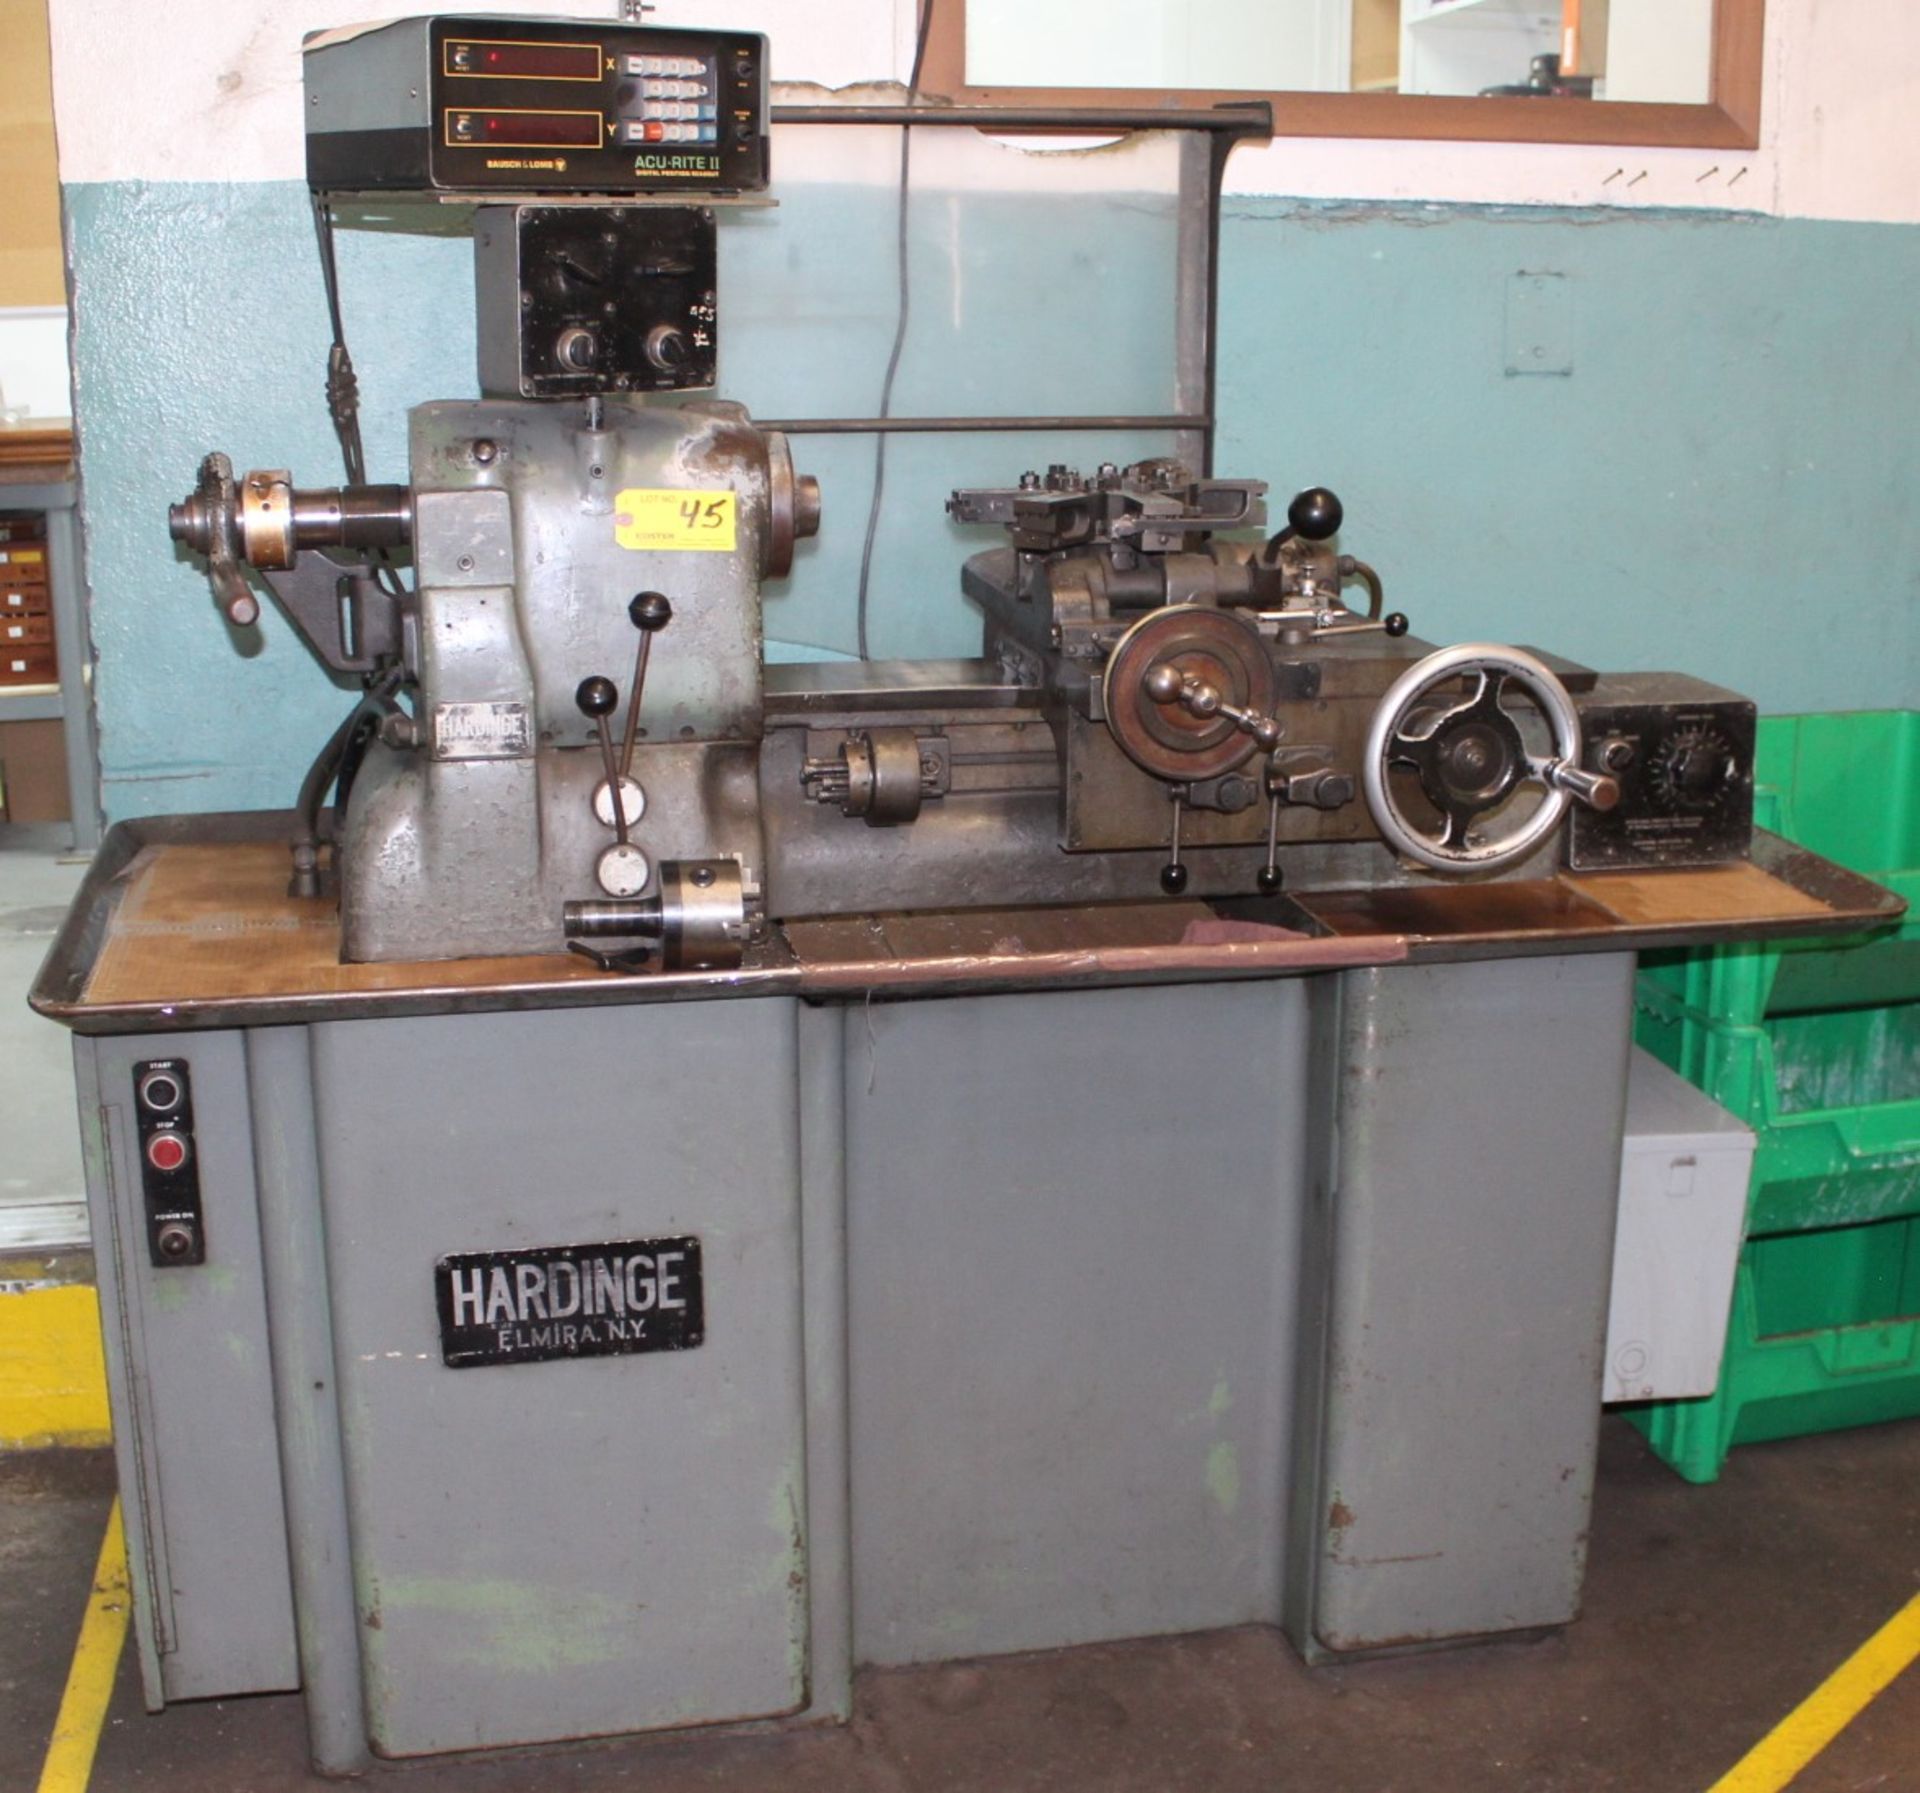 HARDINGE MDL. HC TOOLROOM LATHE, S/N: HC2930H, 8-POSITION TURRET, POWER CARRIAGE FEED, VARIABLE - Image 3 of 5